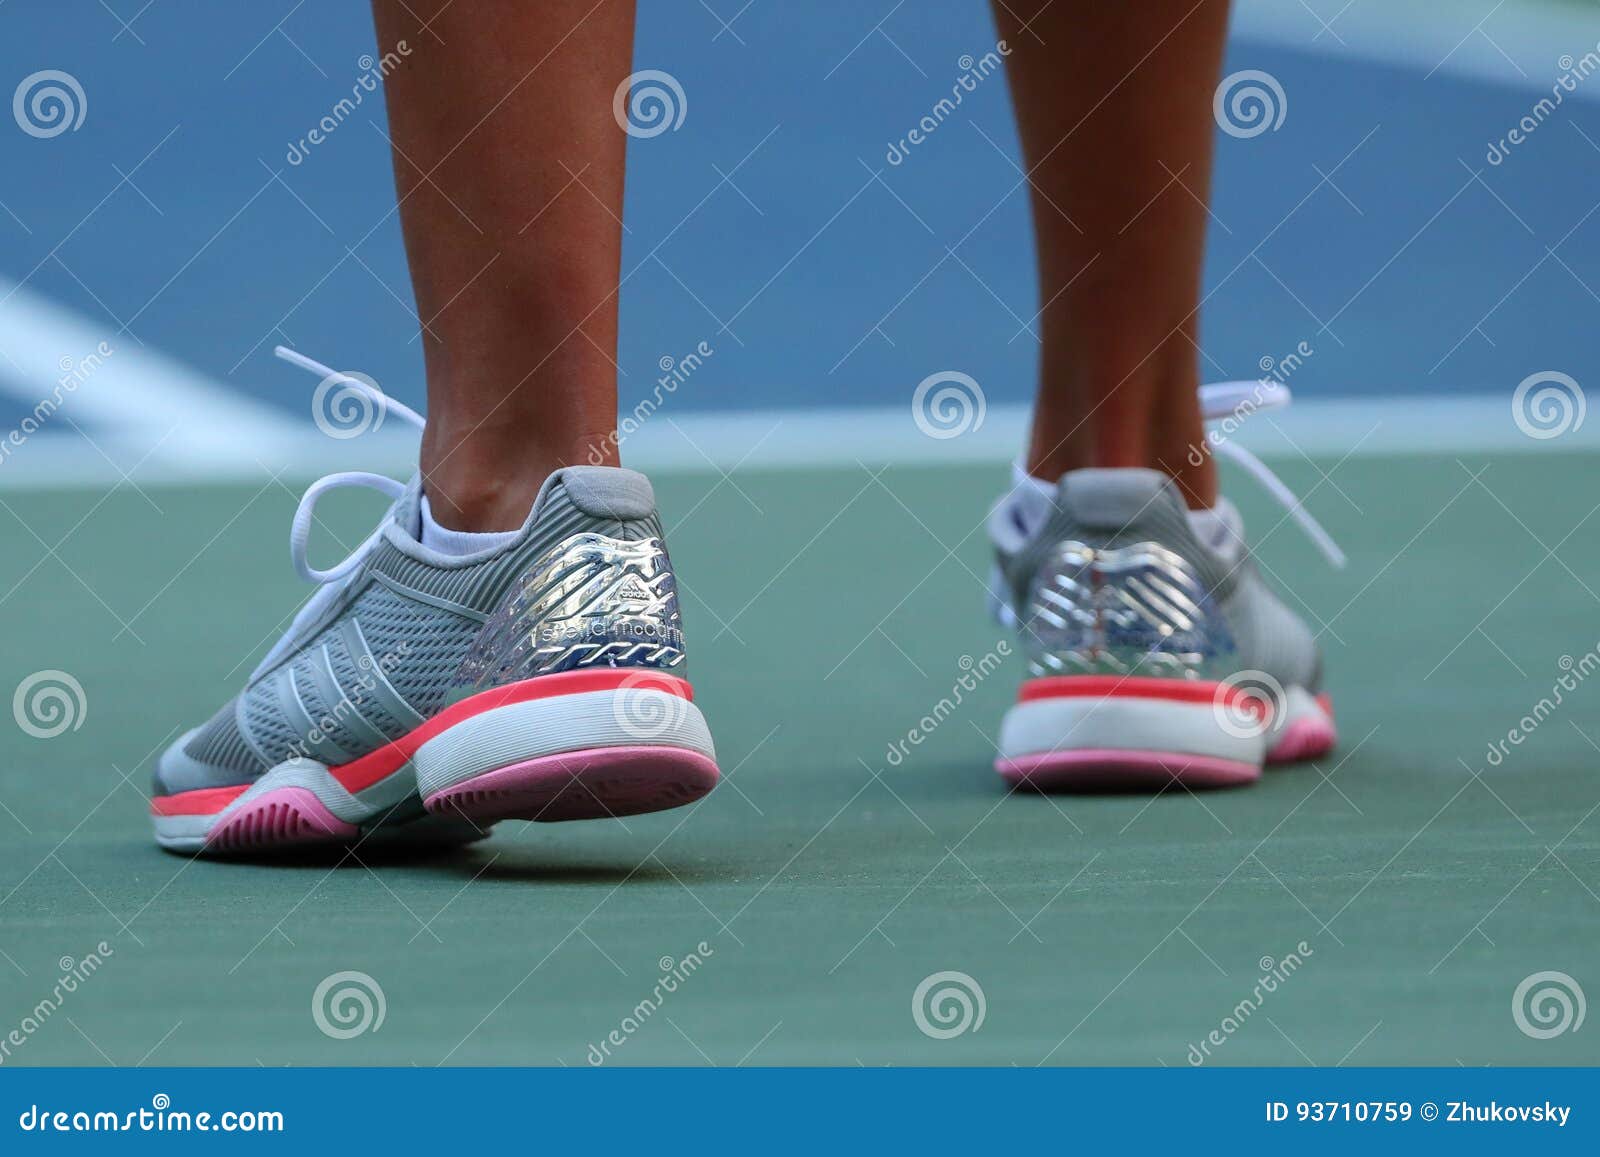 tennis player adidas shoes